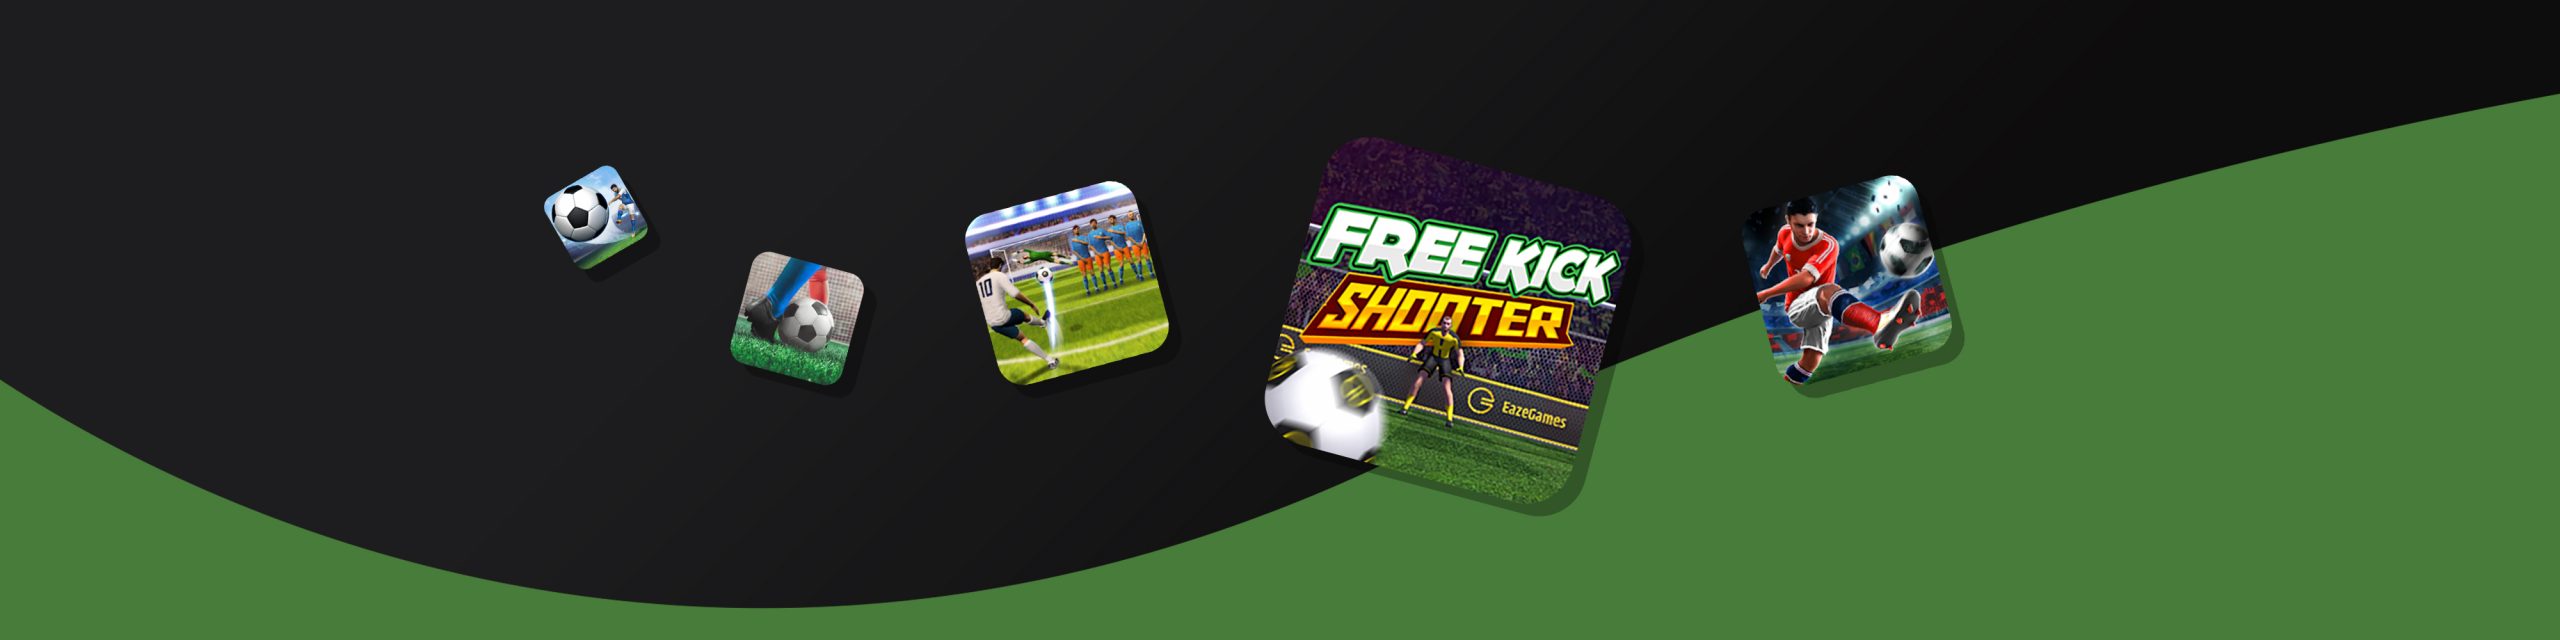 Penalty Shooters – 5 Best Free Kick Shootout Games To Play Online